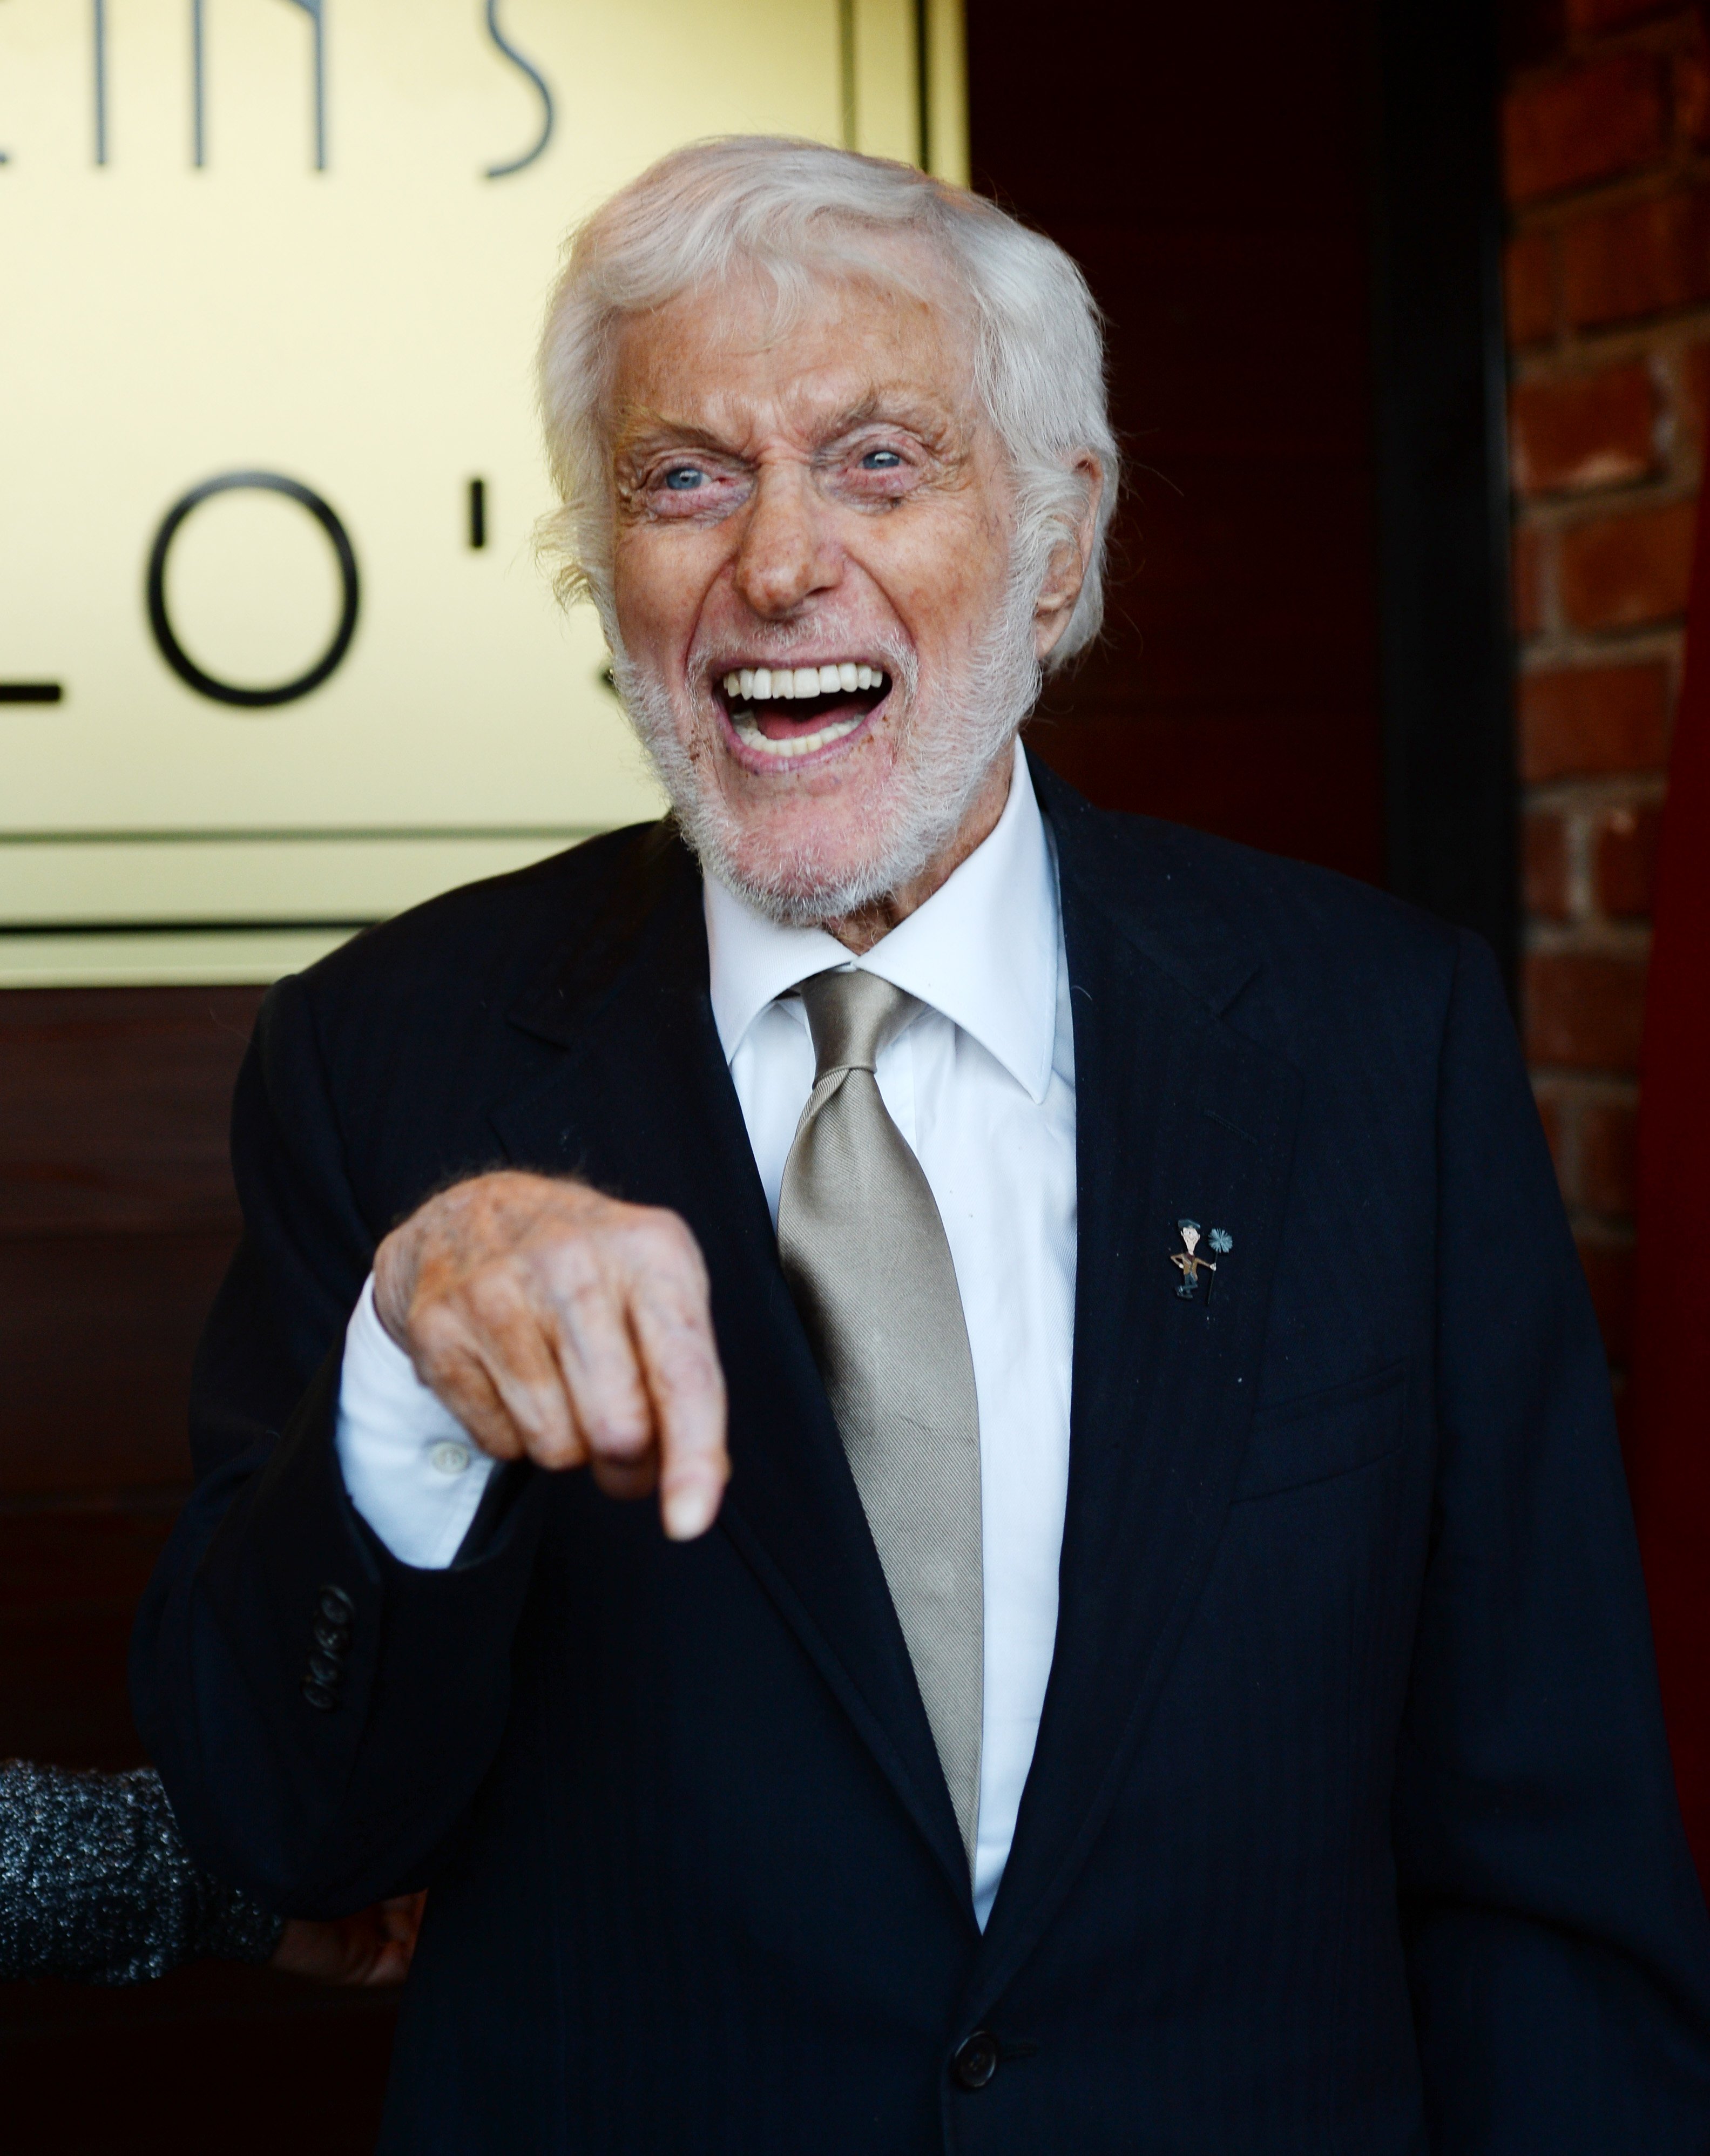 Dick Van Dyke arrives at the opening of Feinstein's supper club in Studio City, California on June 13, 2019 | Photo: Getty Images